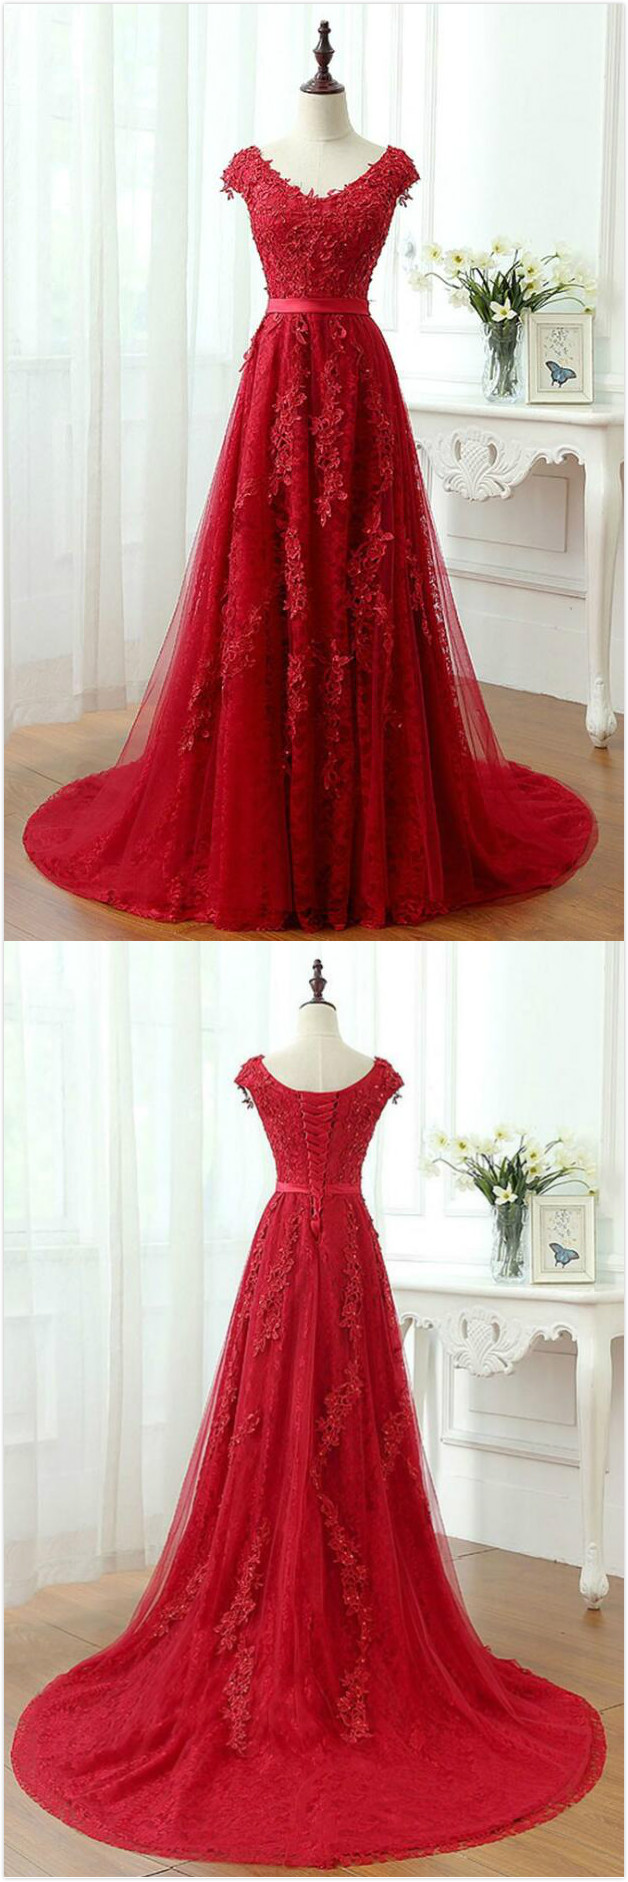 Charming Tulle Prom Dress,mermaid Prom Dress,lace Prom Dress,sexy Prom Dress,applique Lace Prom Dress,long Cap Sleeve Evening Dresses,red Lace